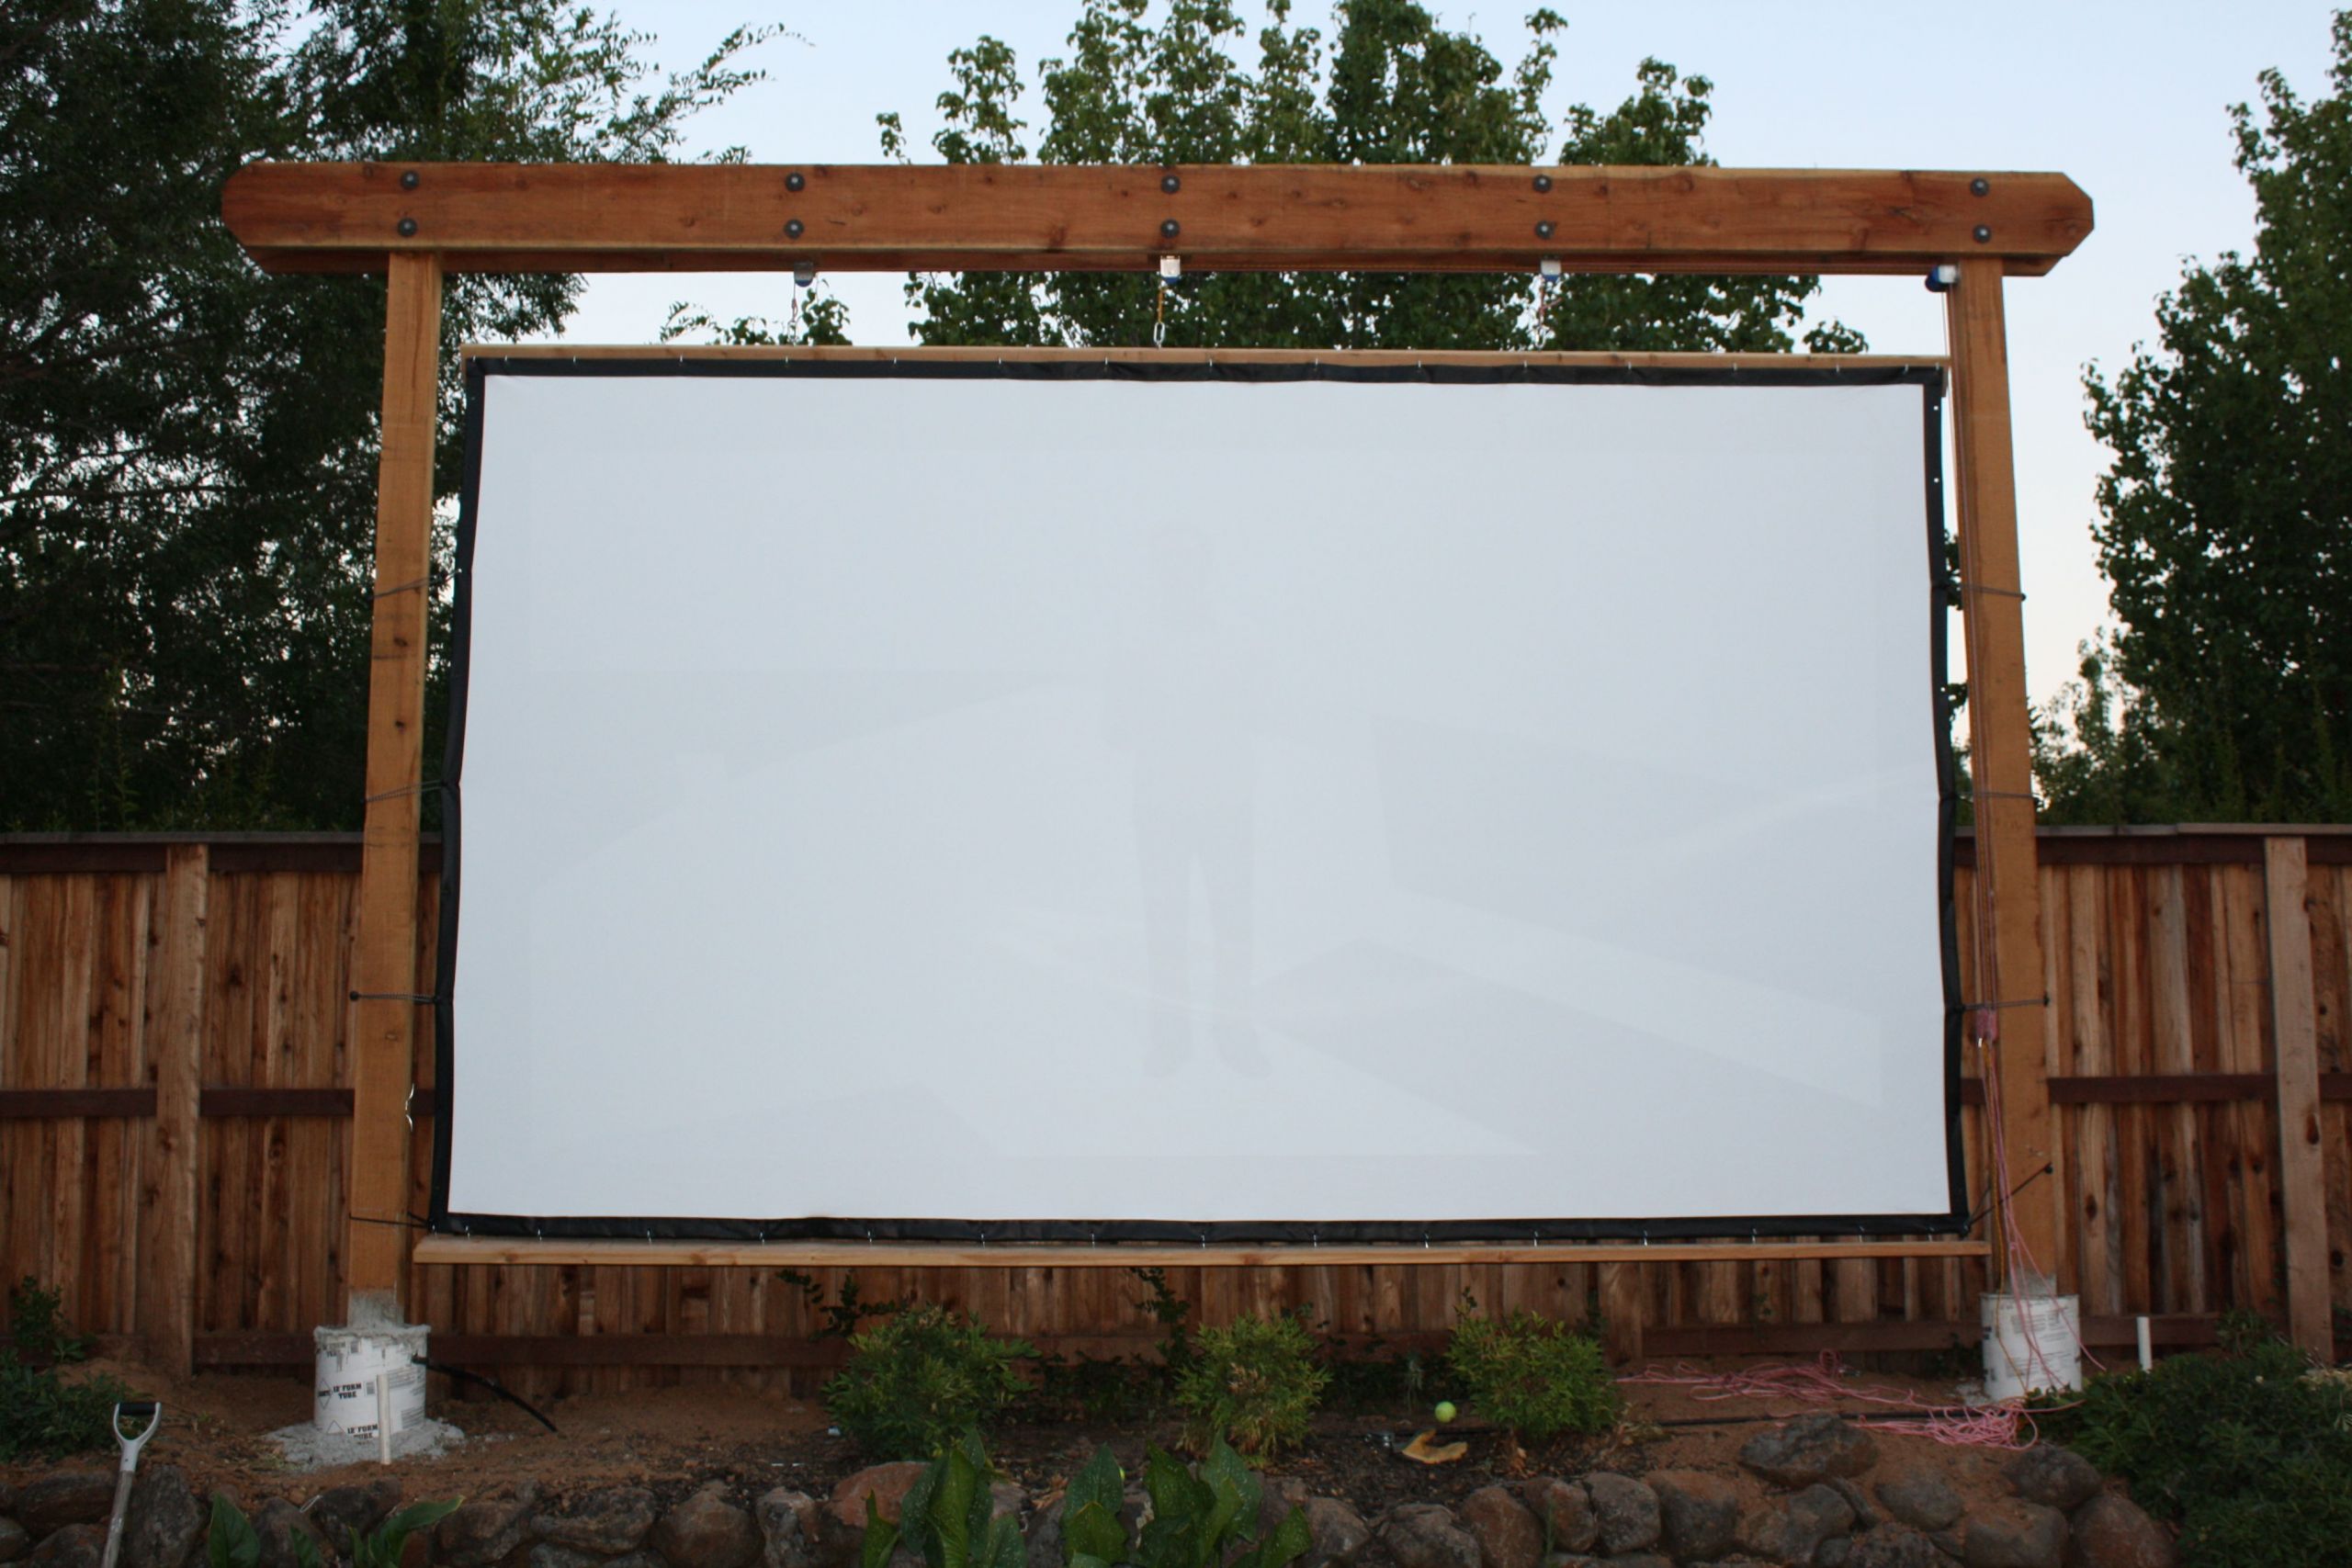 DIY Outdoor Theatre Screen
 New frame and screen Backyard Theater Forums in 2019